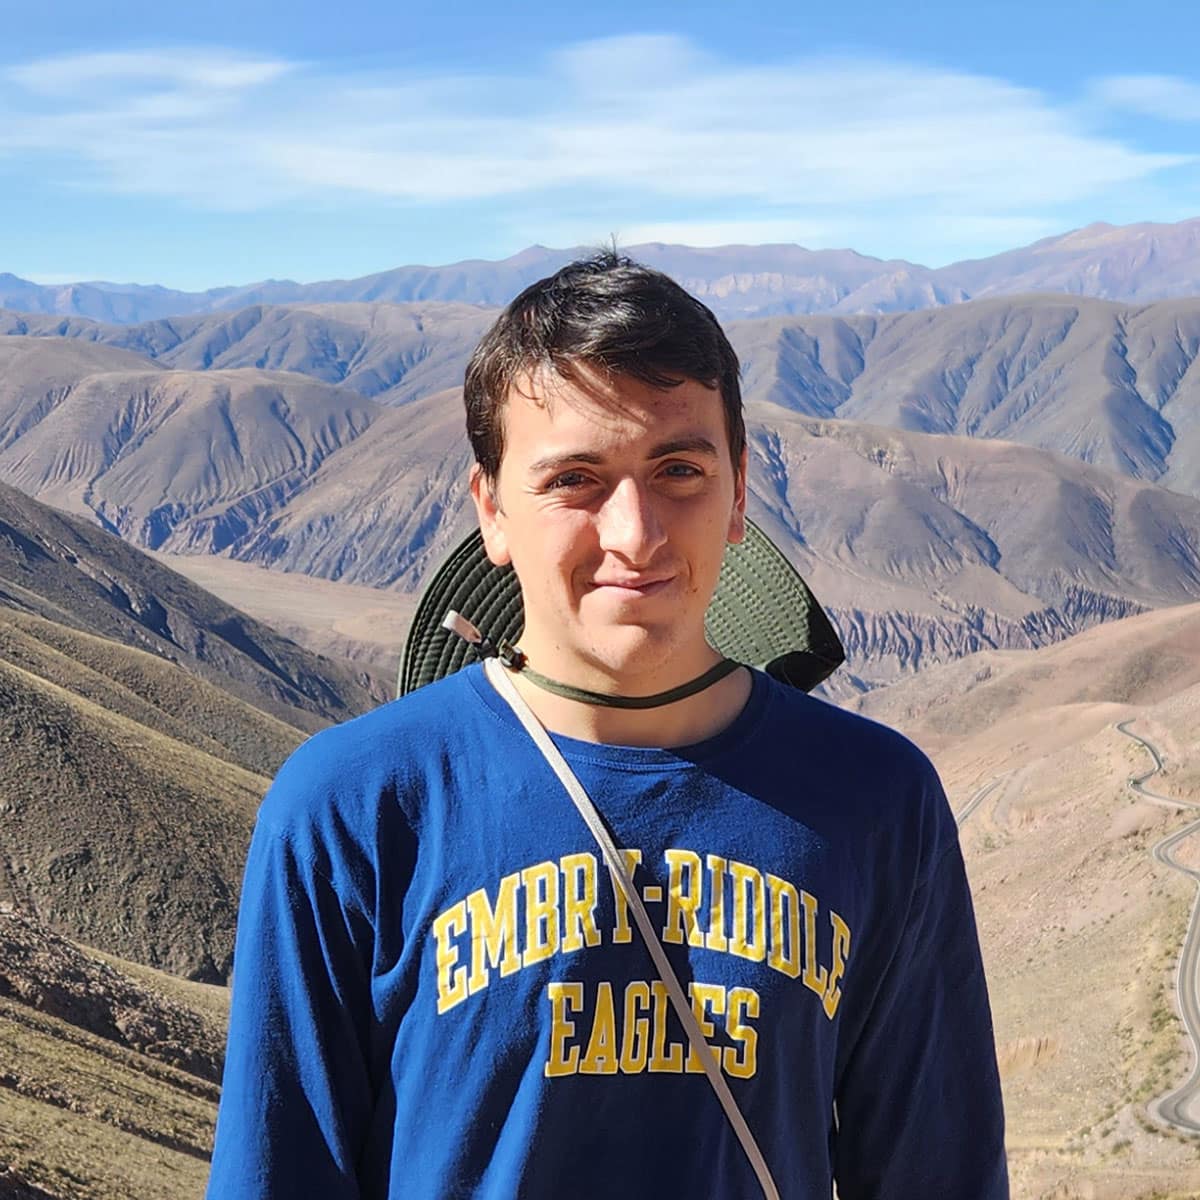 Zackrey poses, squinting into the camera, with a background of brown and gold canyon stretching into the distance. He has light skin tone and is wearing an Embry-Riddle Eagles sweatshirt and a safari hat hanging around his neck.